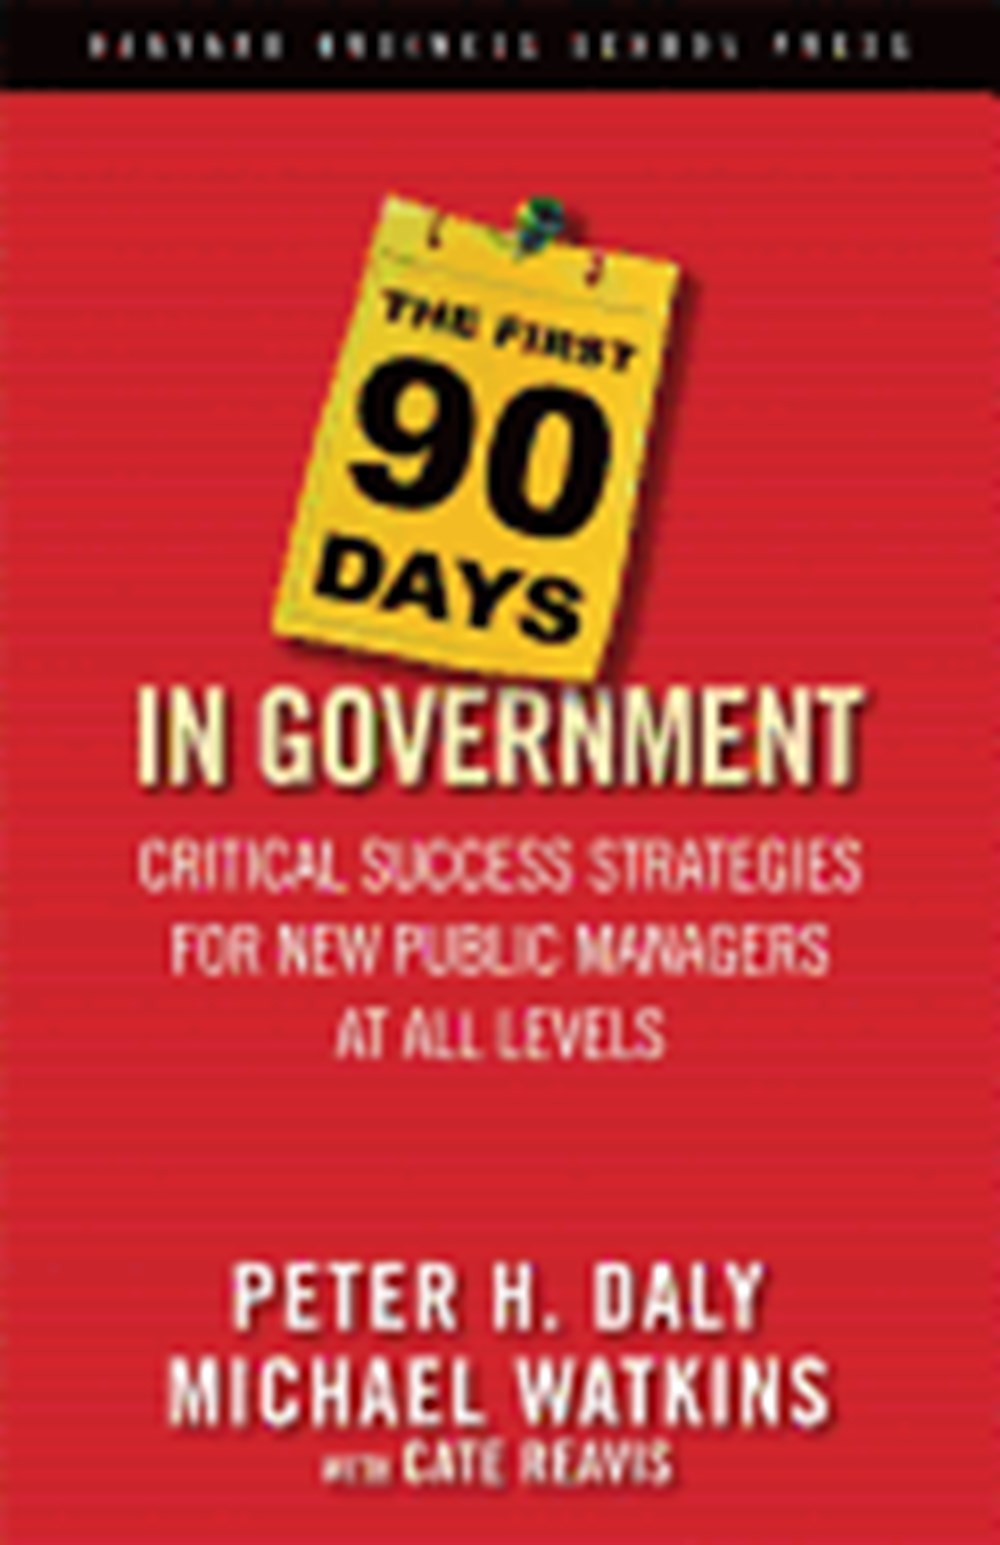 First 90 Days in Government Critical Success Strategies for New Public Managers at All Levels